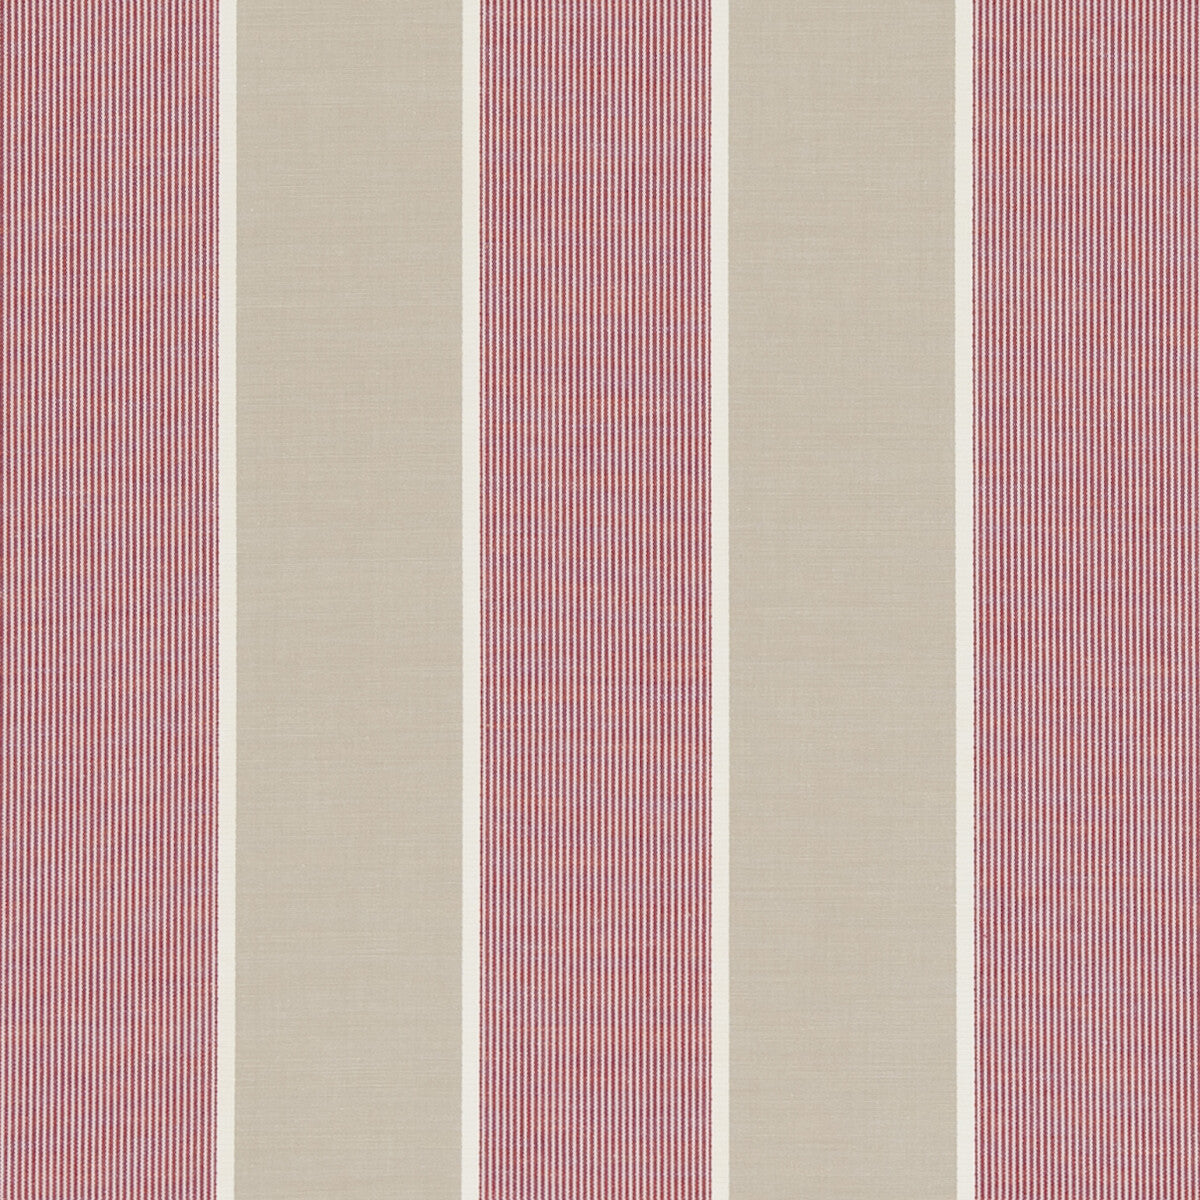 Chatburn fabric in raspberry color - pattern F0597/05.CAC.0 - by Clarke And Clarke in the Clarke &amp; Clarke Ribble Valley collection